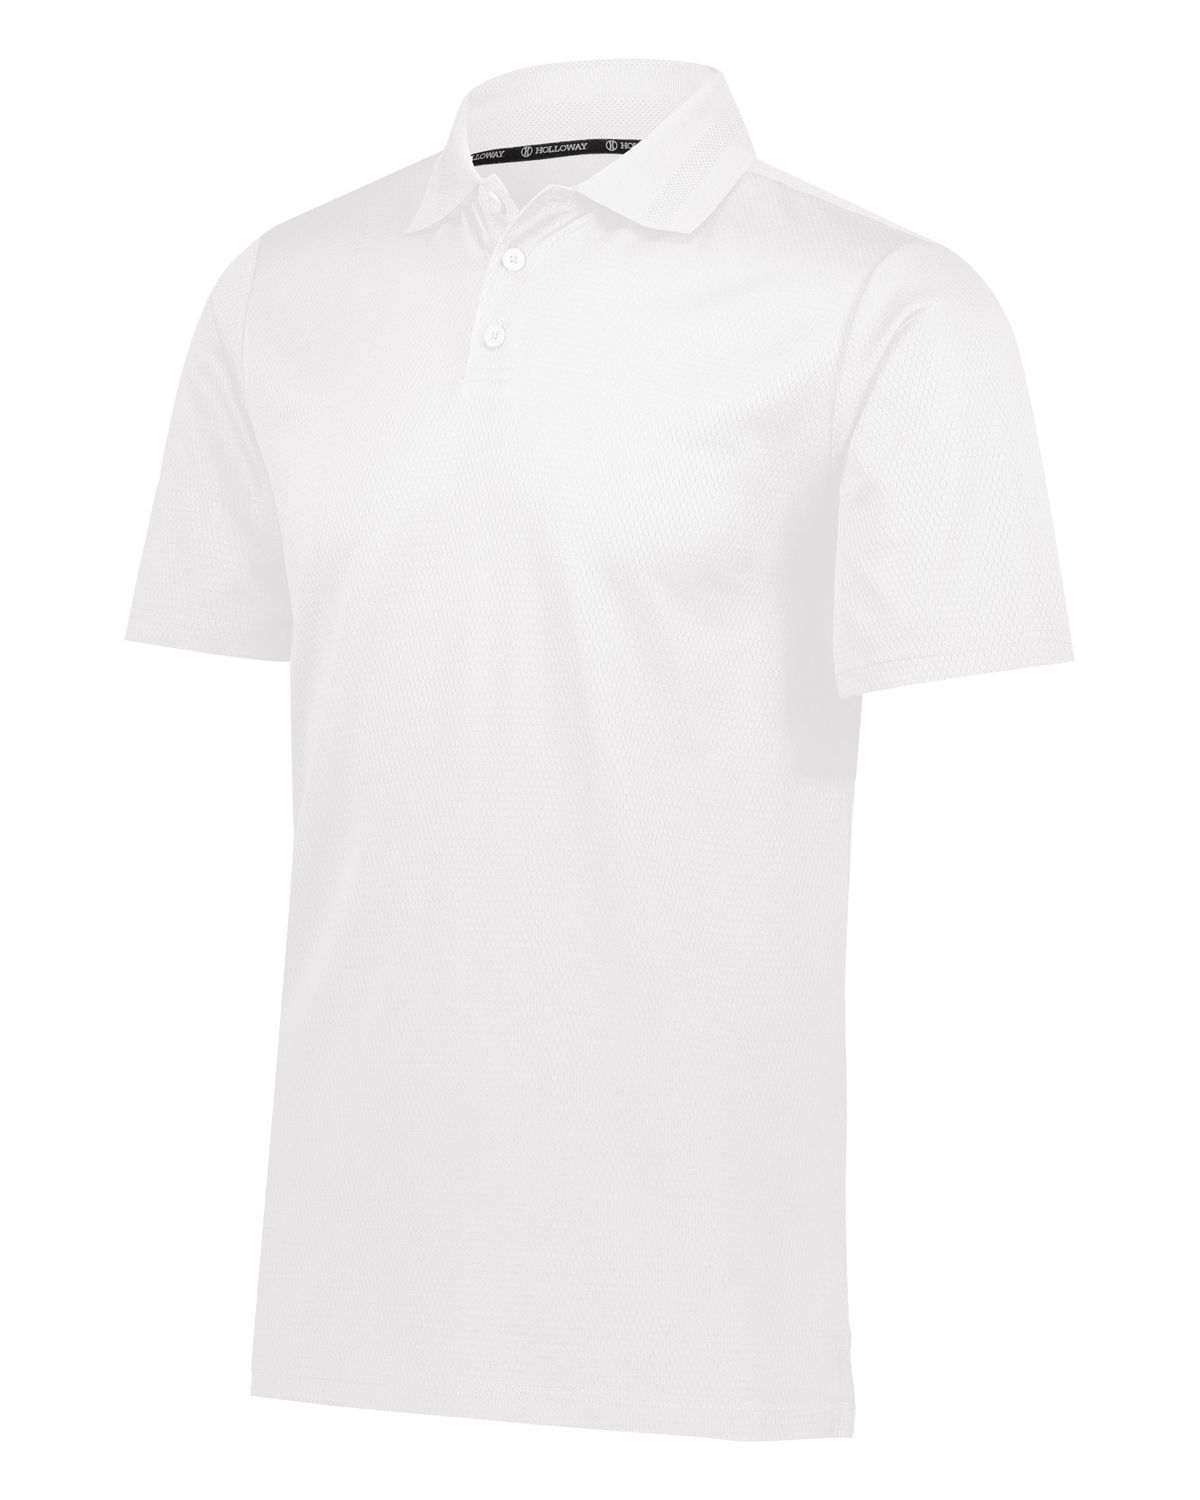 Holloway 222568 Prism polo-Veetrends.com